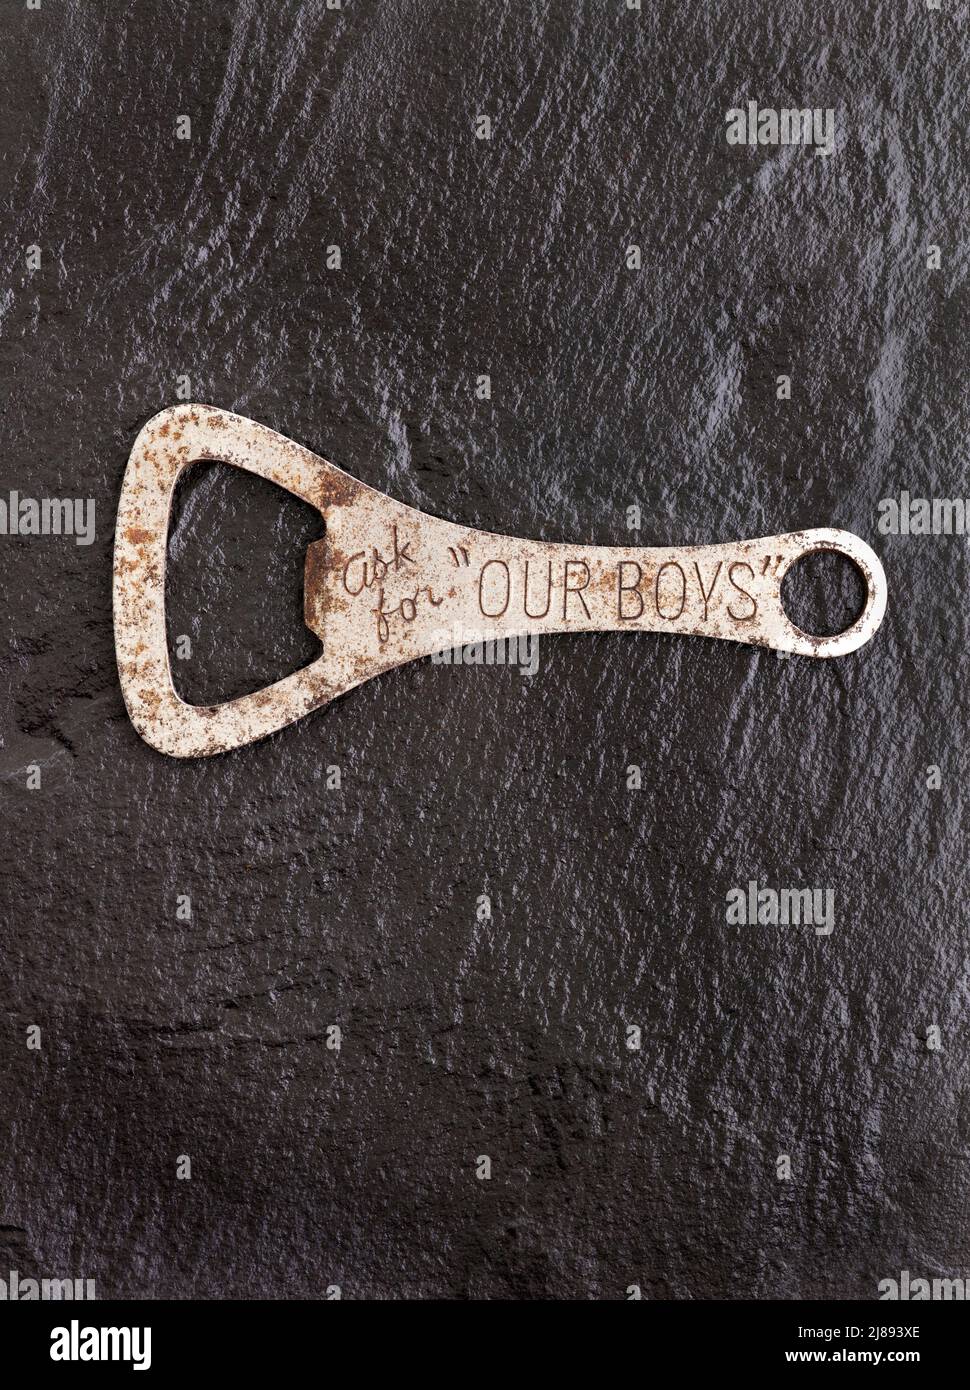 Ask For Our Boys - Old vintage bottle opener Stock Photo